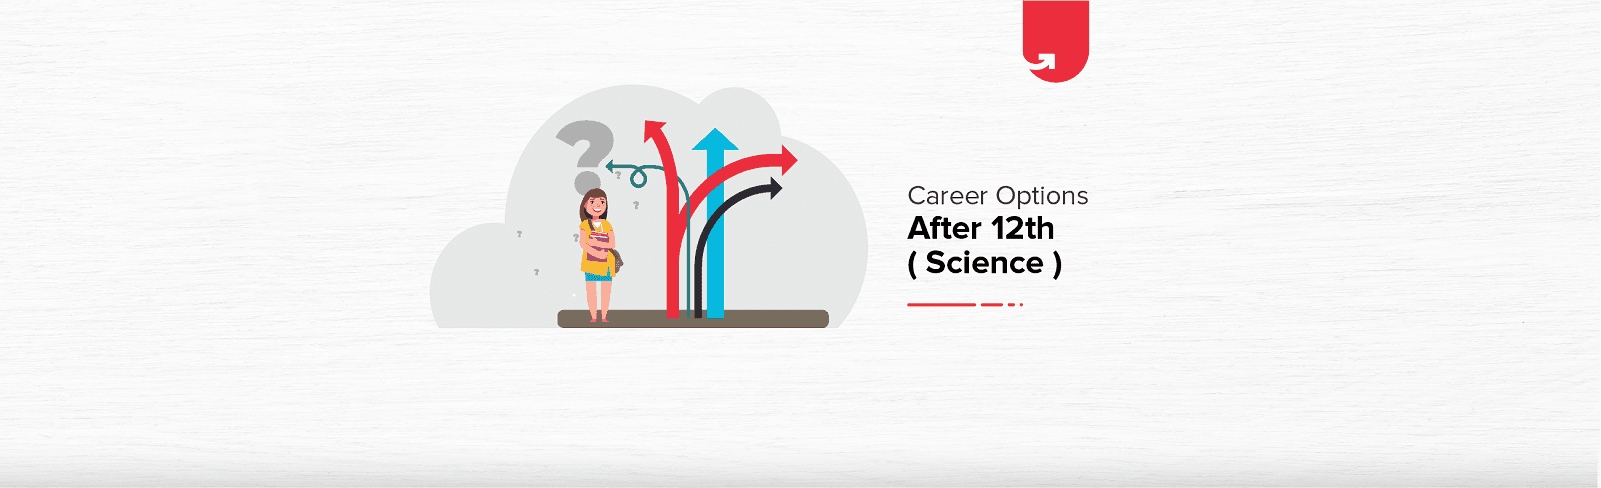 Top Career Options After 12th Science: What Course To Do After 12th Science